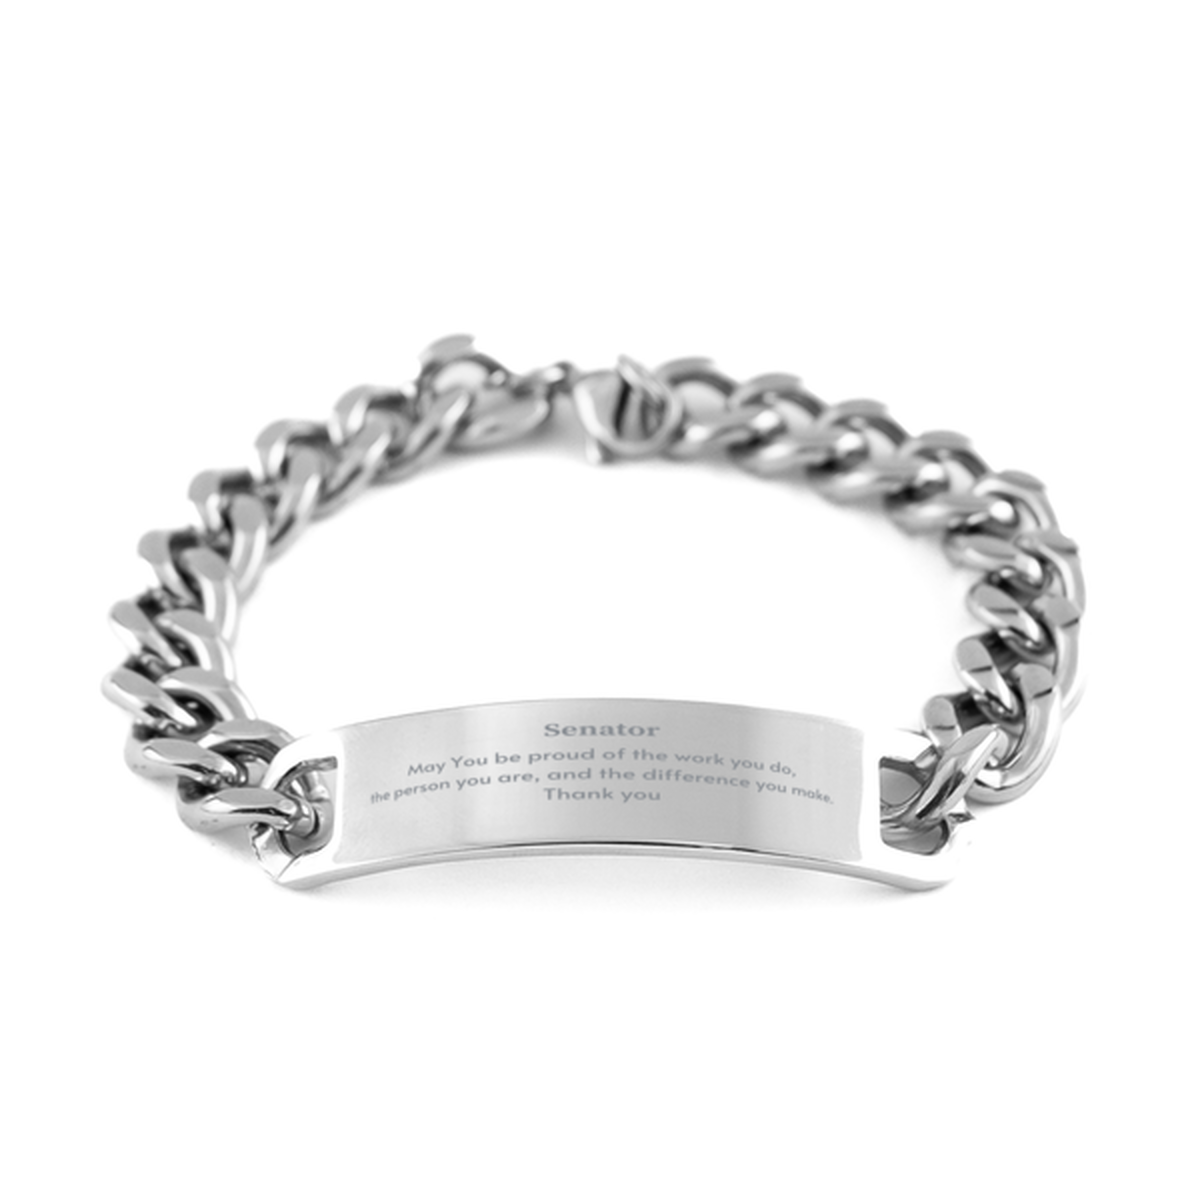 Heartwarming Cuban Chain Stainless Steel Bracelet Retirement Coworkers Gifts for Senator, Senator May You be proud of the work you do, the person you are Gifts for Boss Men Women Friends